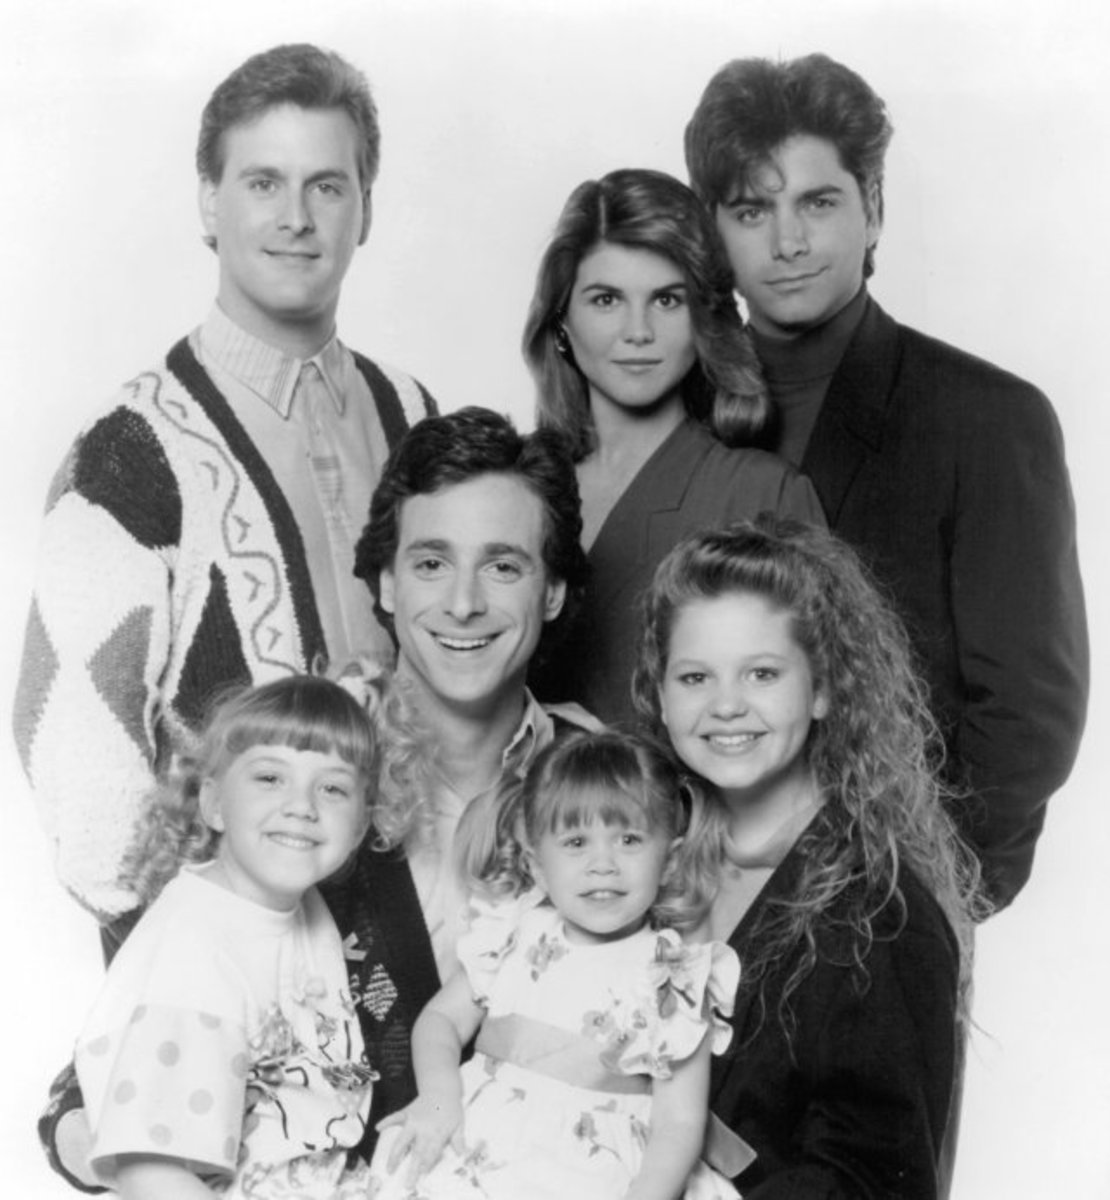 Full House - Where Are They Now?